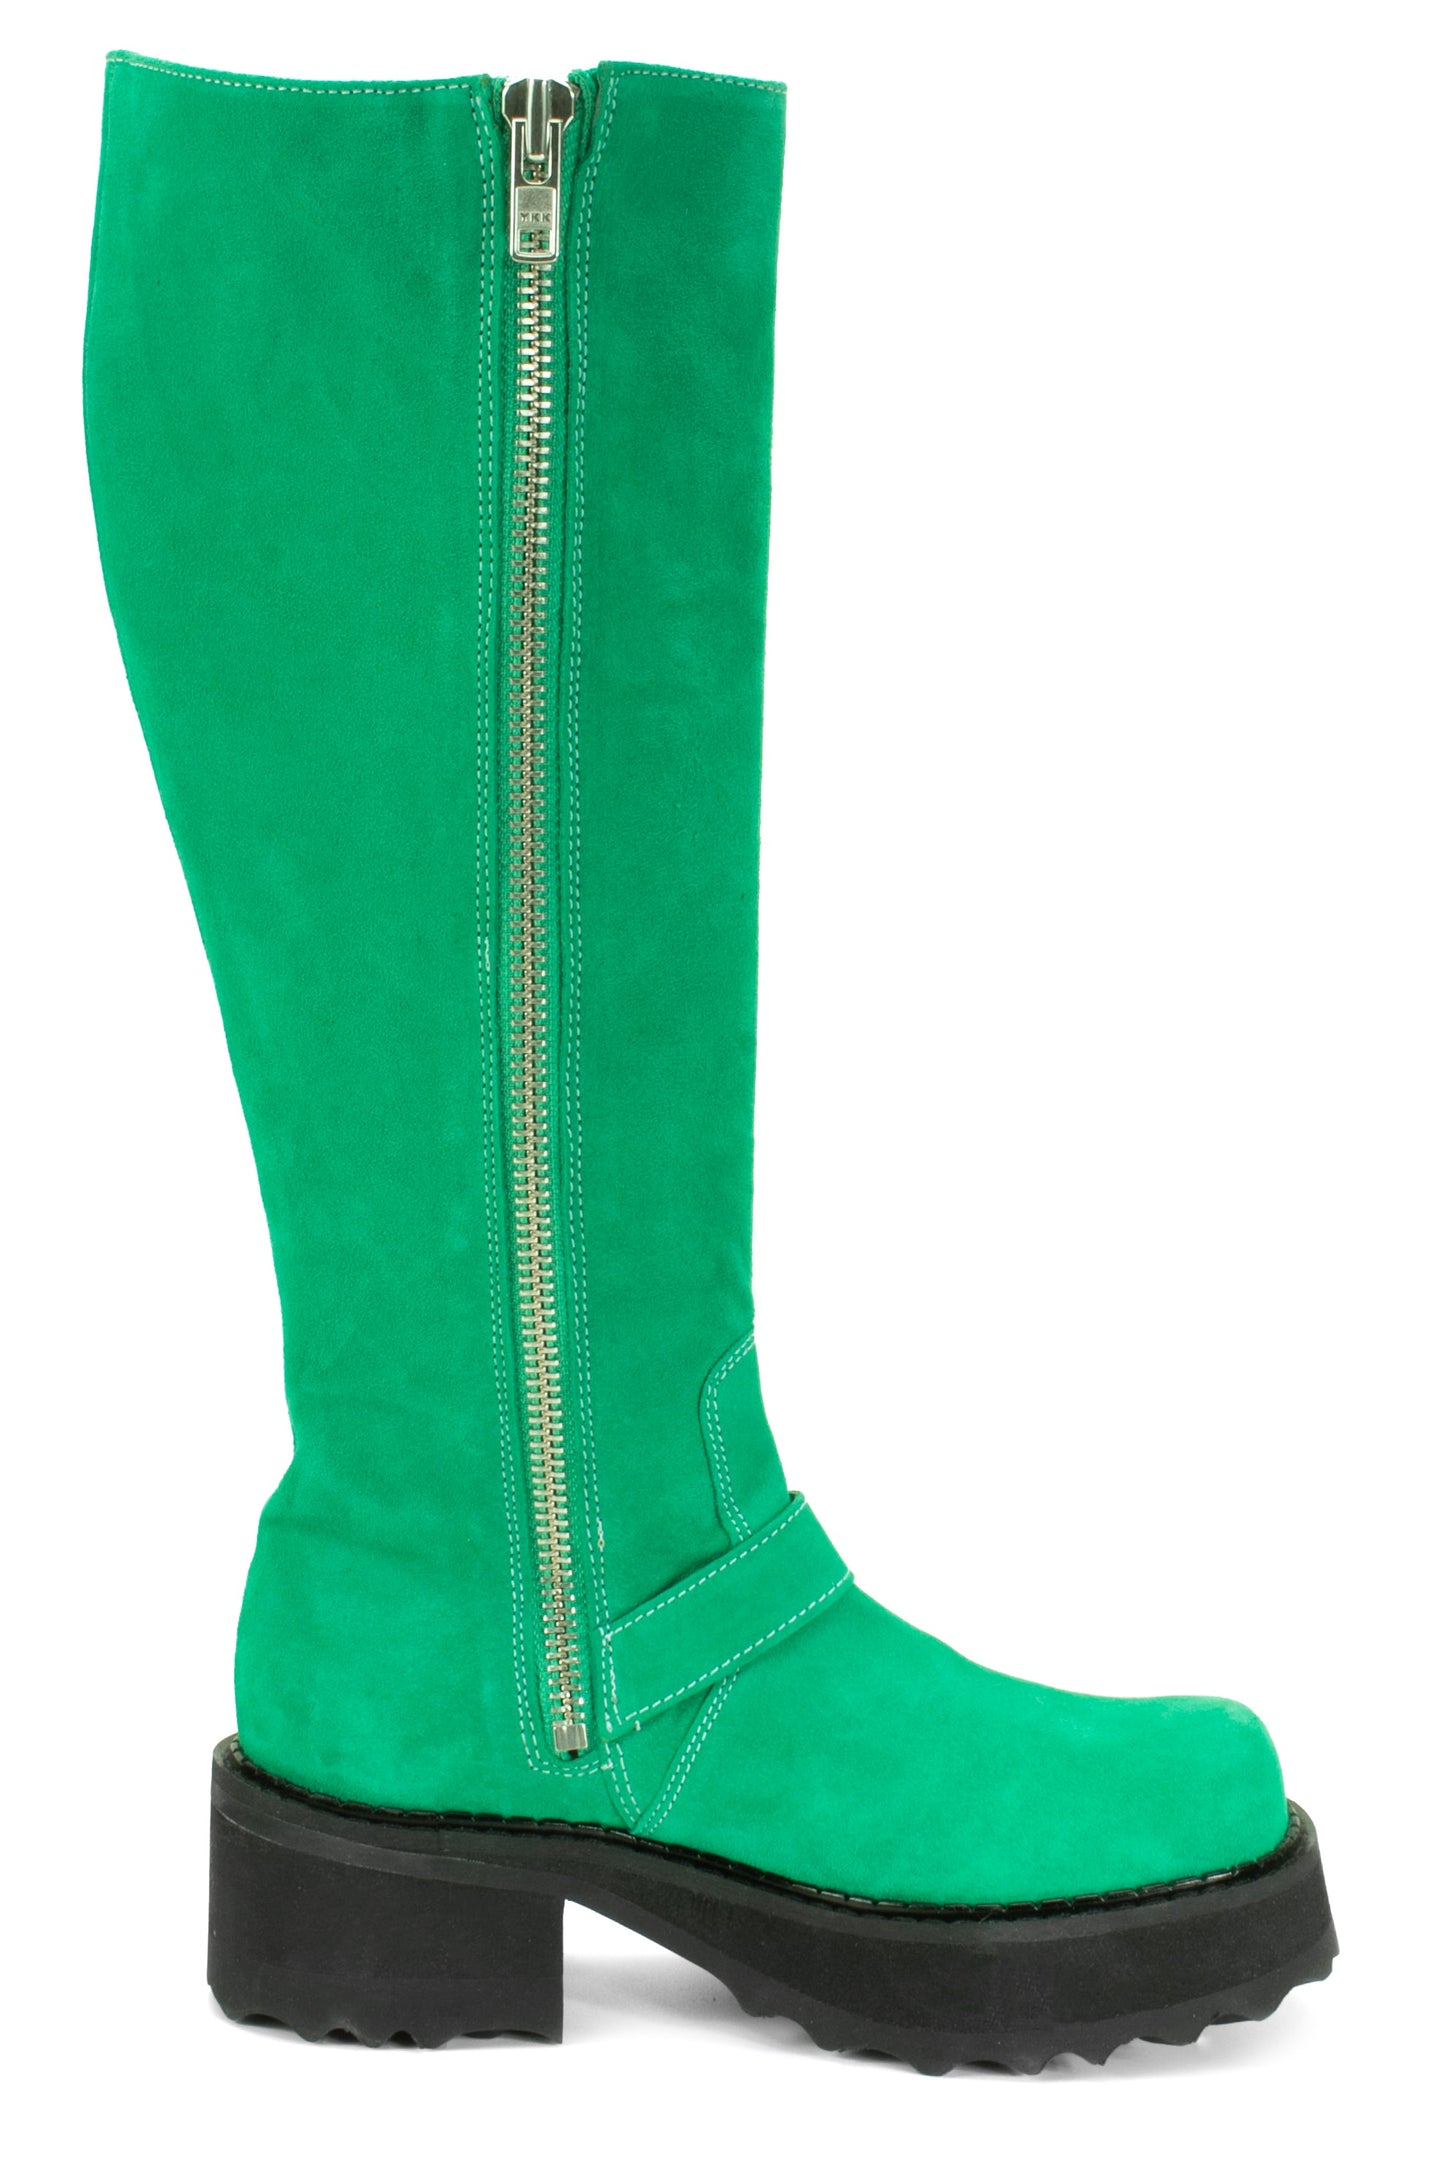 A large zipper inside the boots from top to bottom with green stitches start from the top